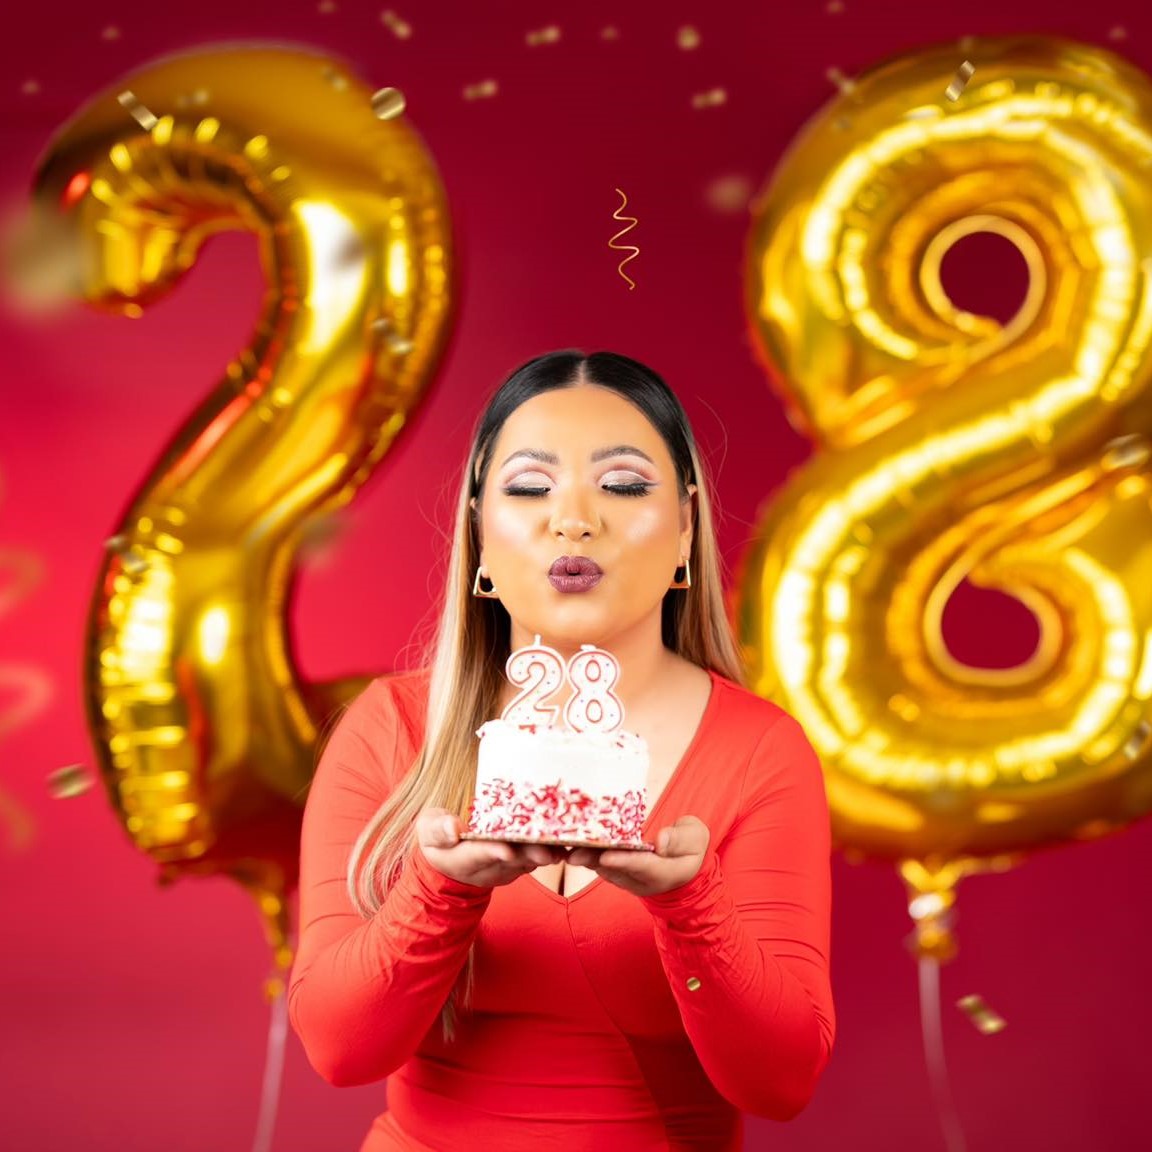 A woman blowing out "28" candles on a cake in front of "28" balloons. 